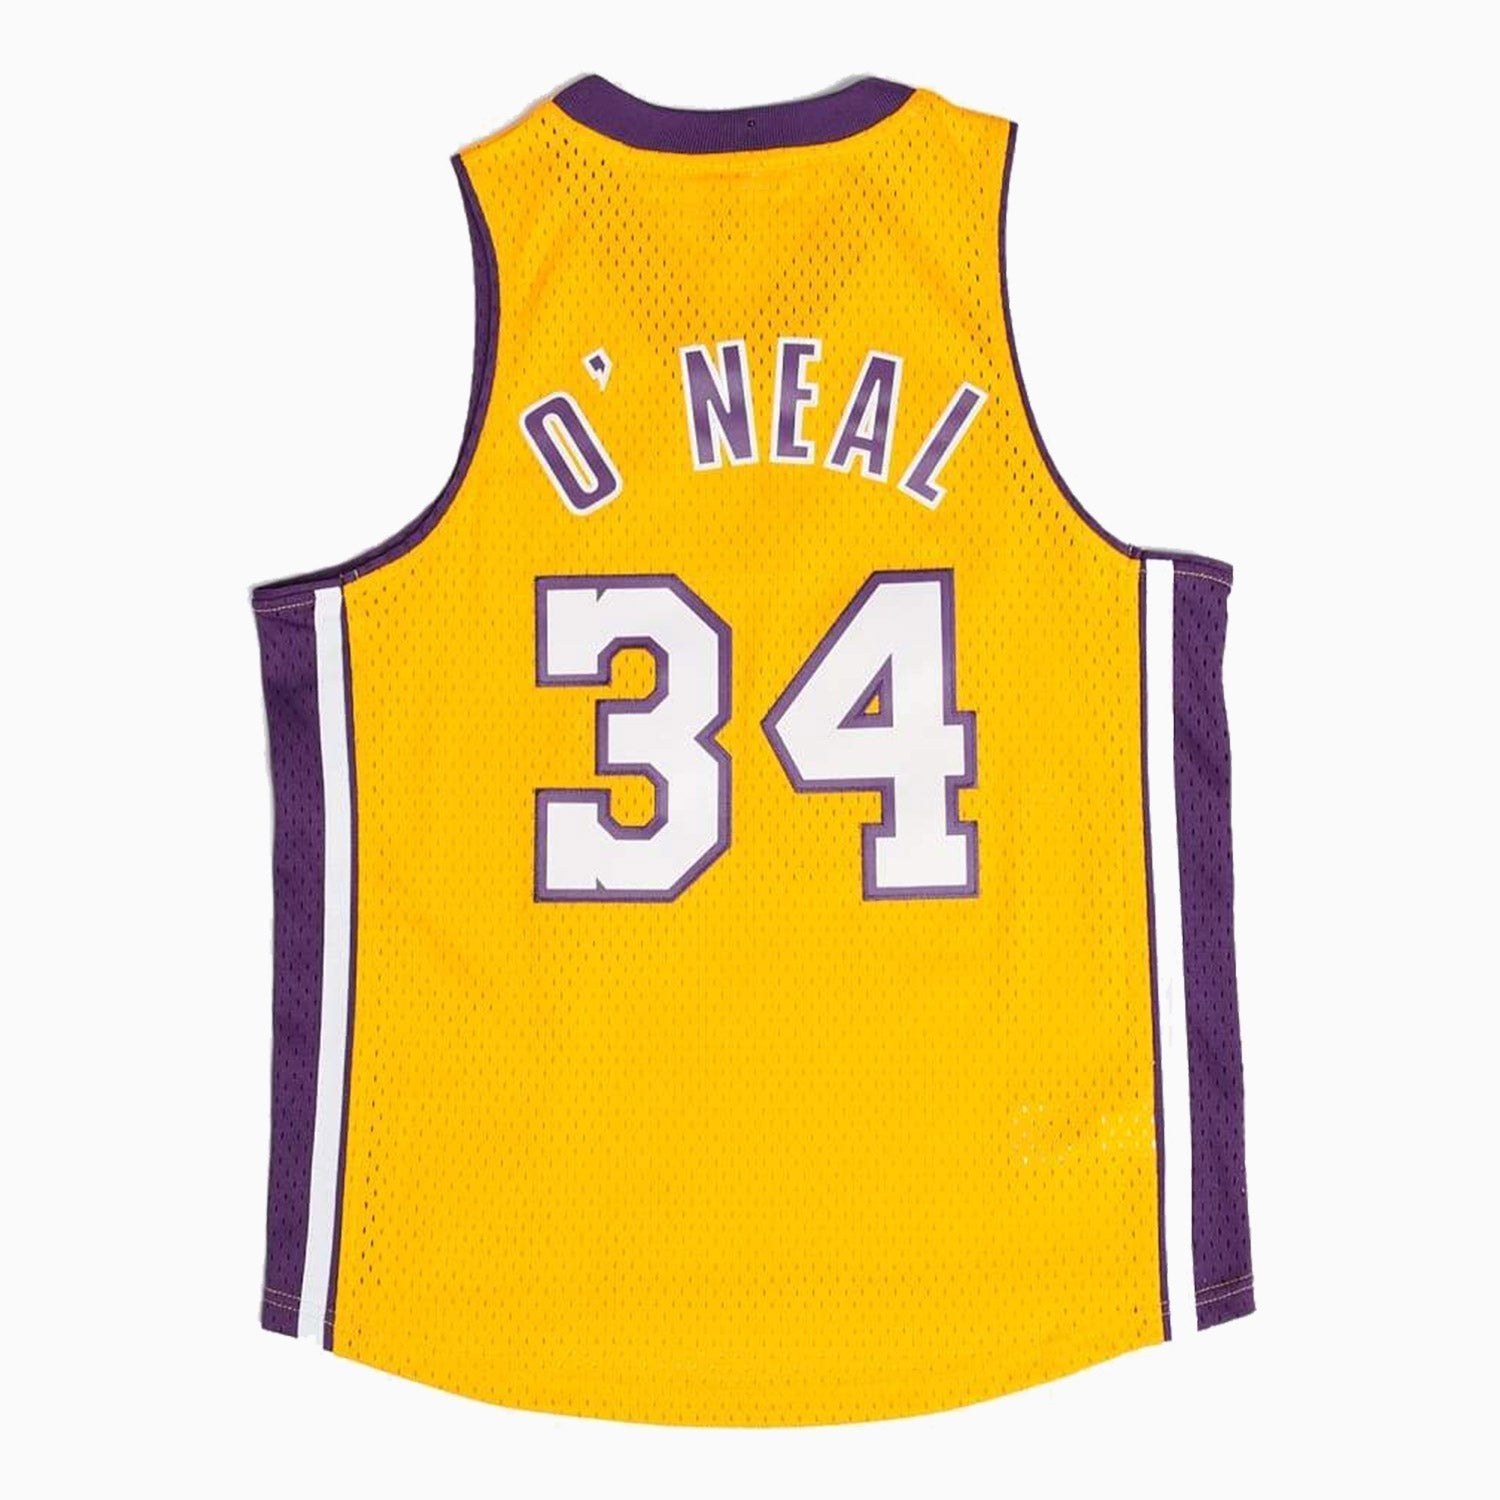 mitchell-and-ness-swingman-shaquille-o-neal-los-angeles-lakers-nba-1999-00-jersey-youth-9n2b7bhm0-lakso-y99